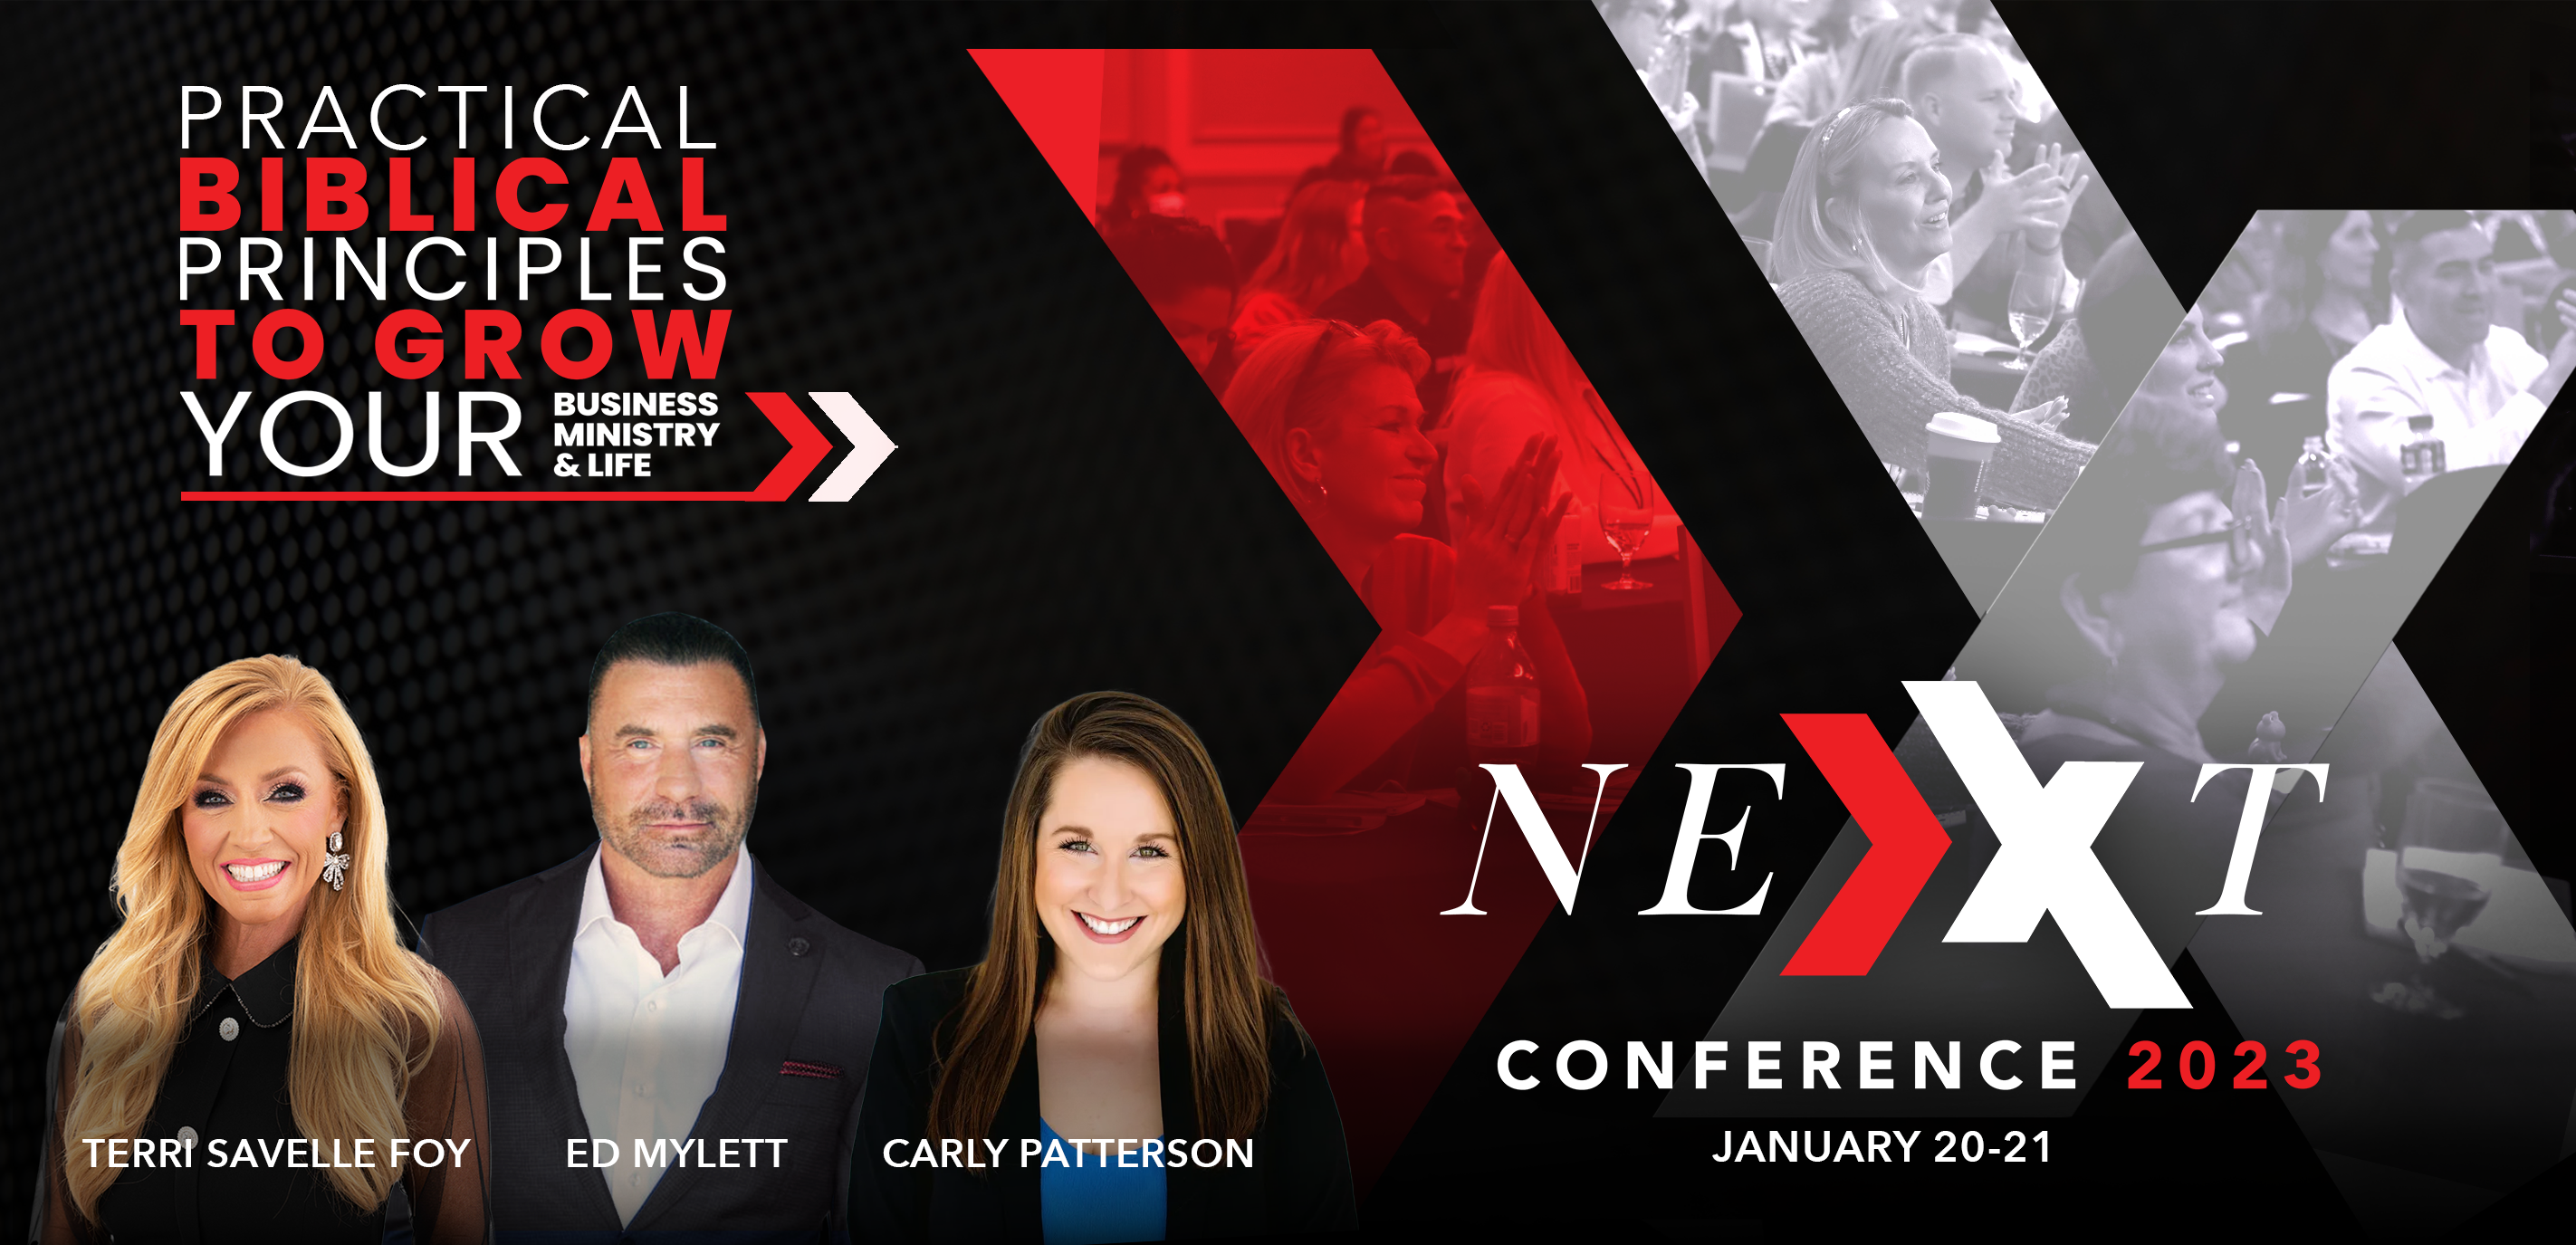 NEXT Conference 2023 with Terri Savelle Foy, Ed Mylett, & Carly Patterson